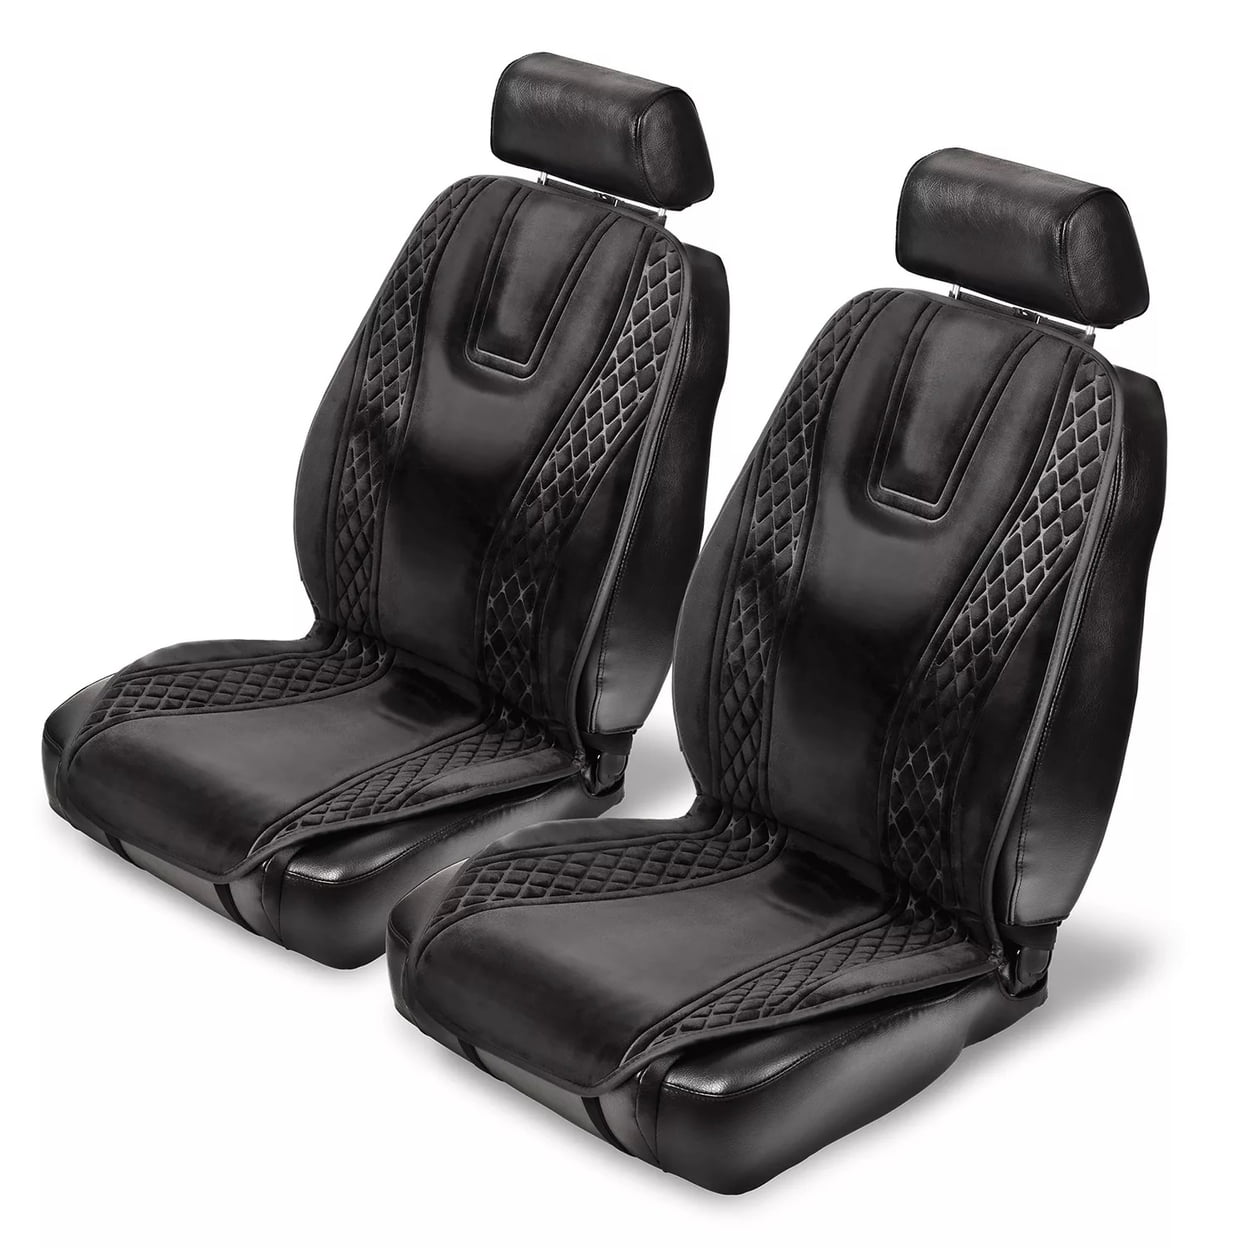 Heated Seat Covers – Online store for your car